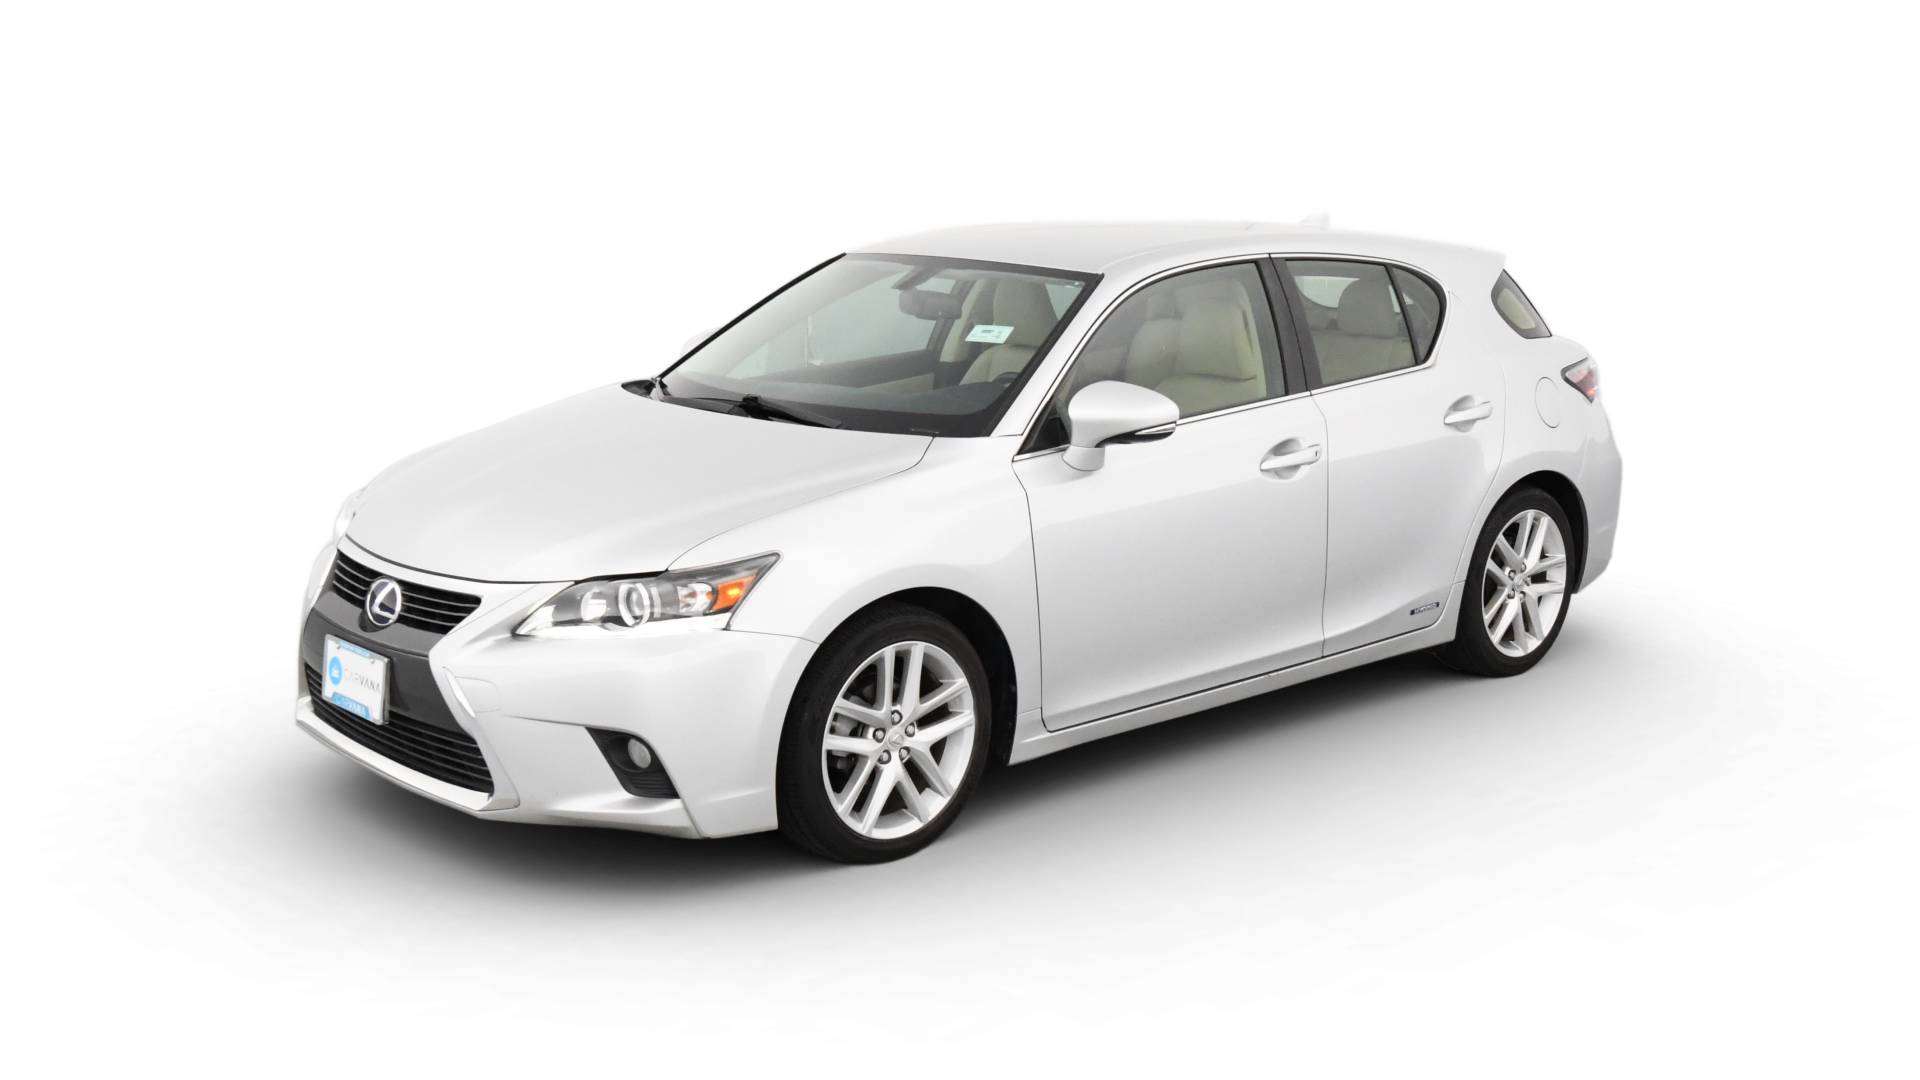 Used Lexus Ct For Sale Online Carvana